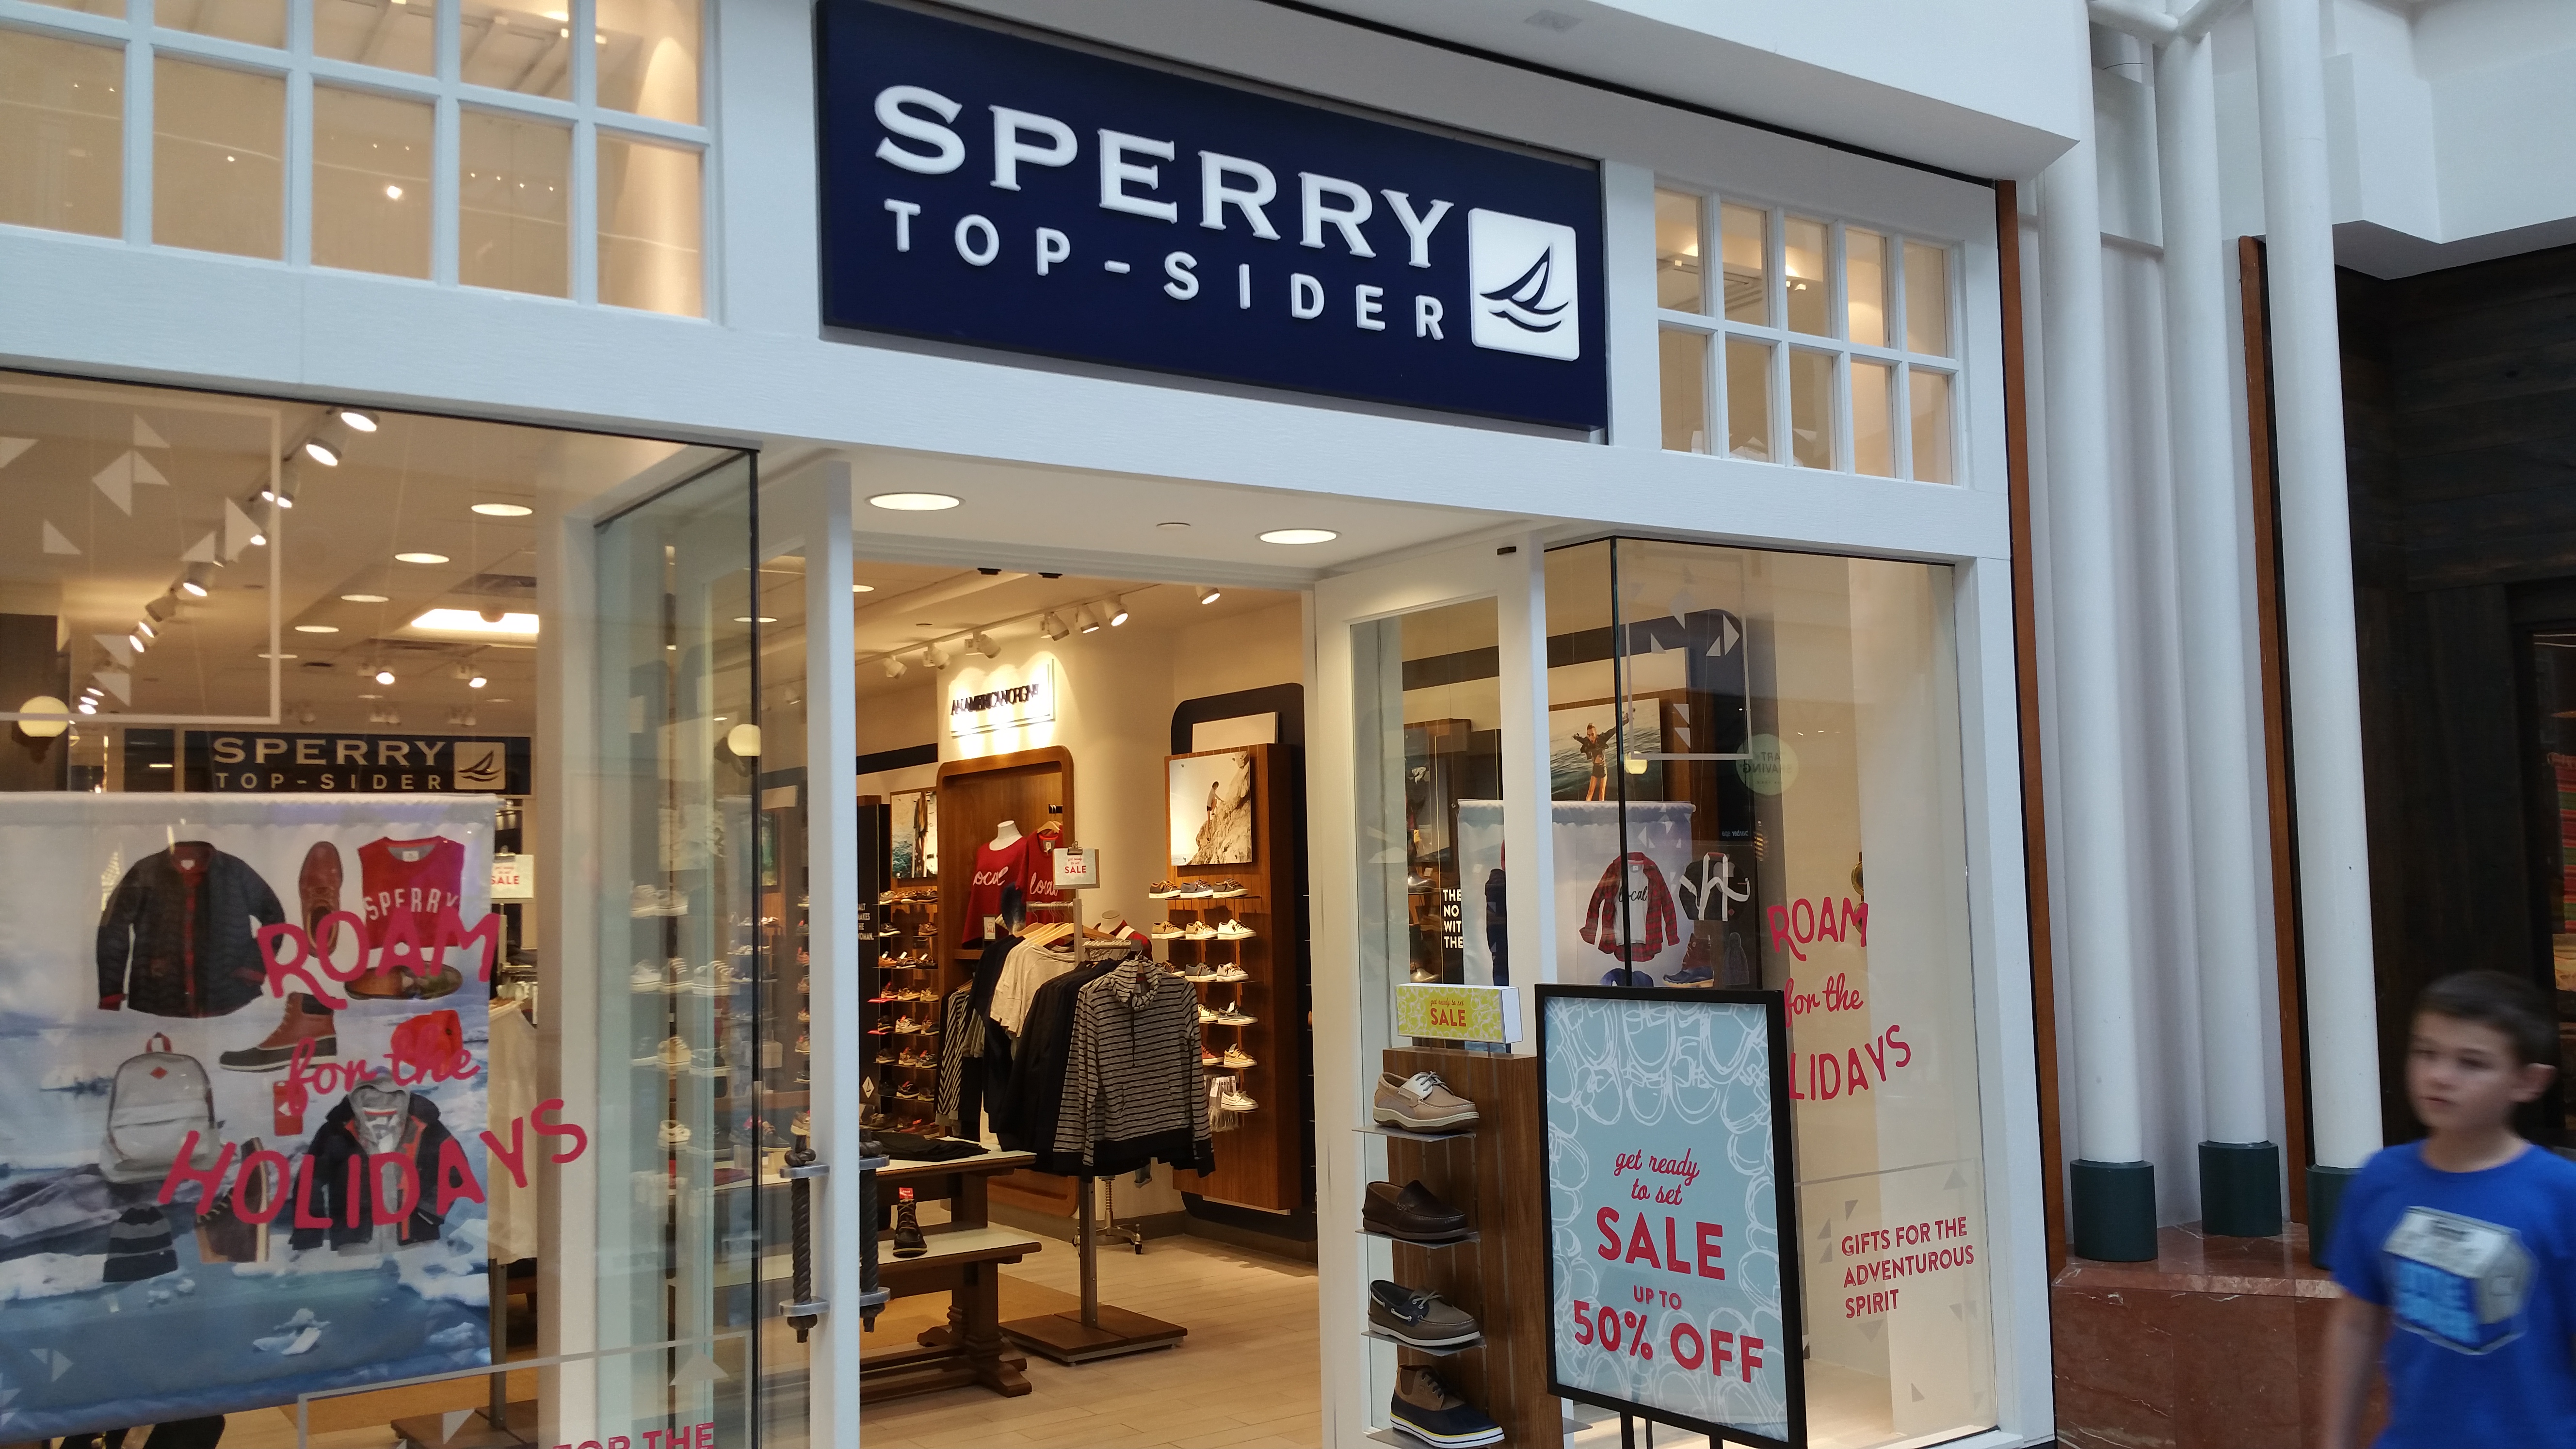 sperry store